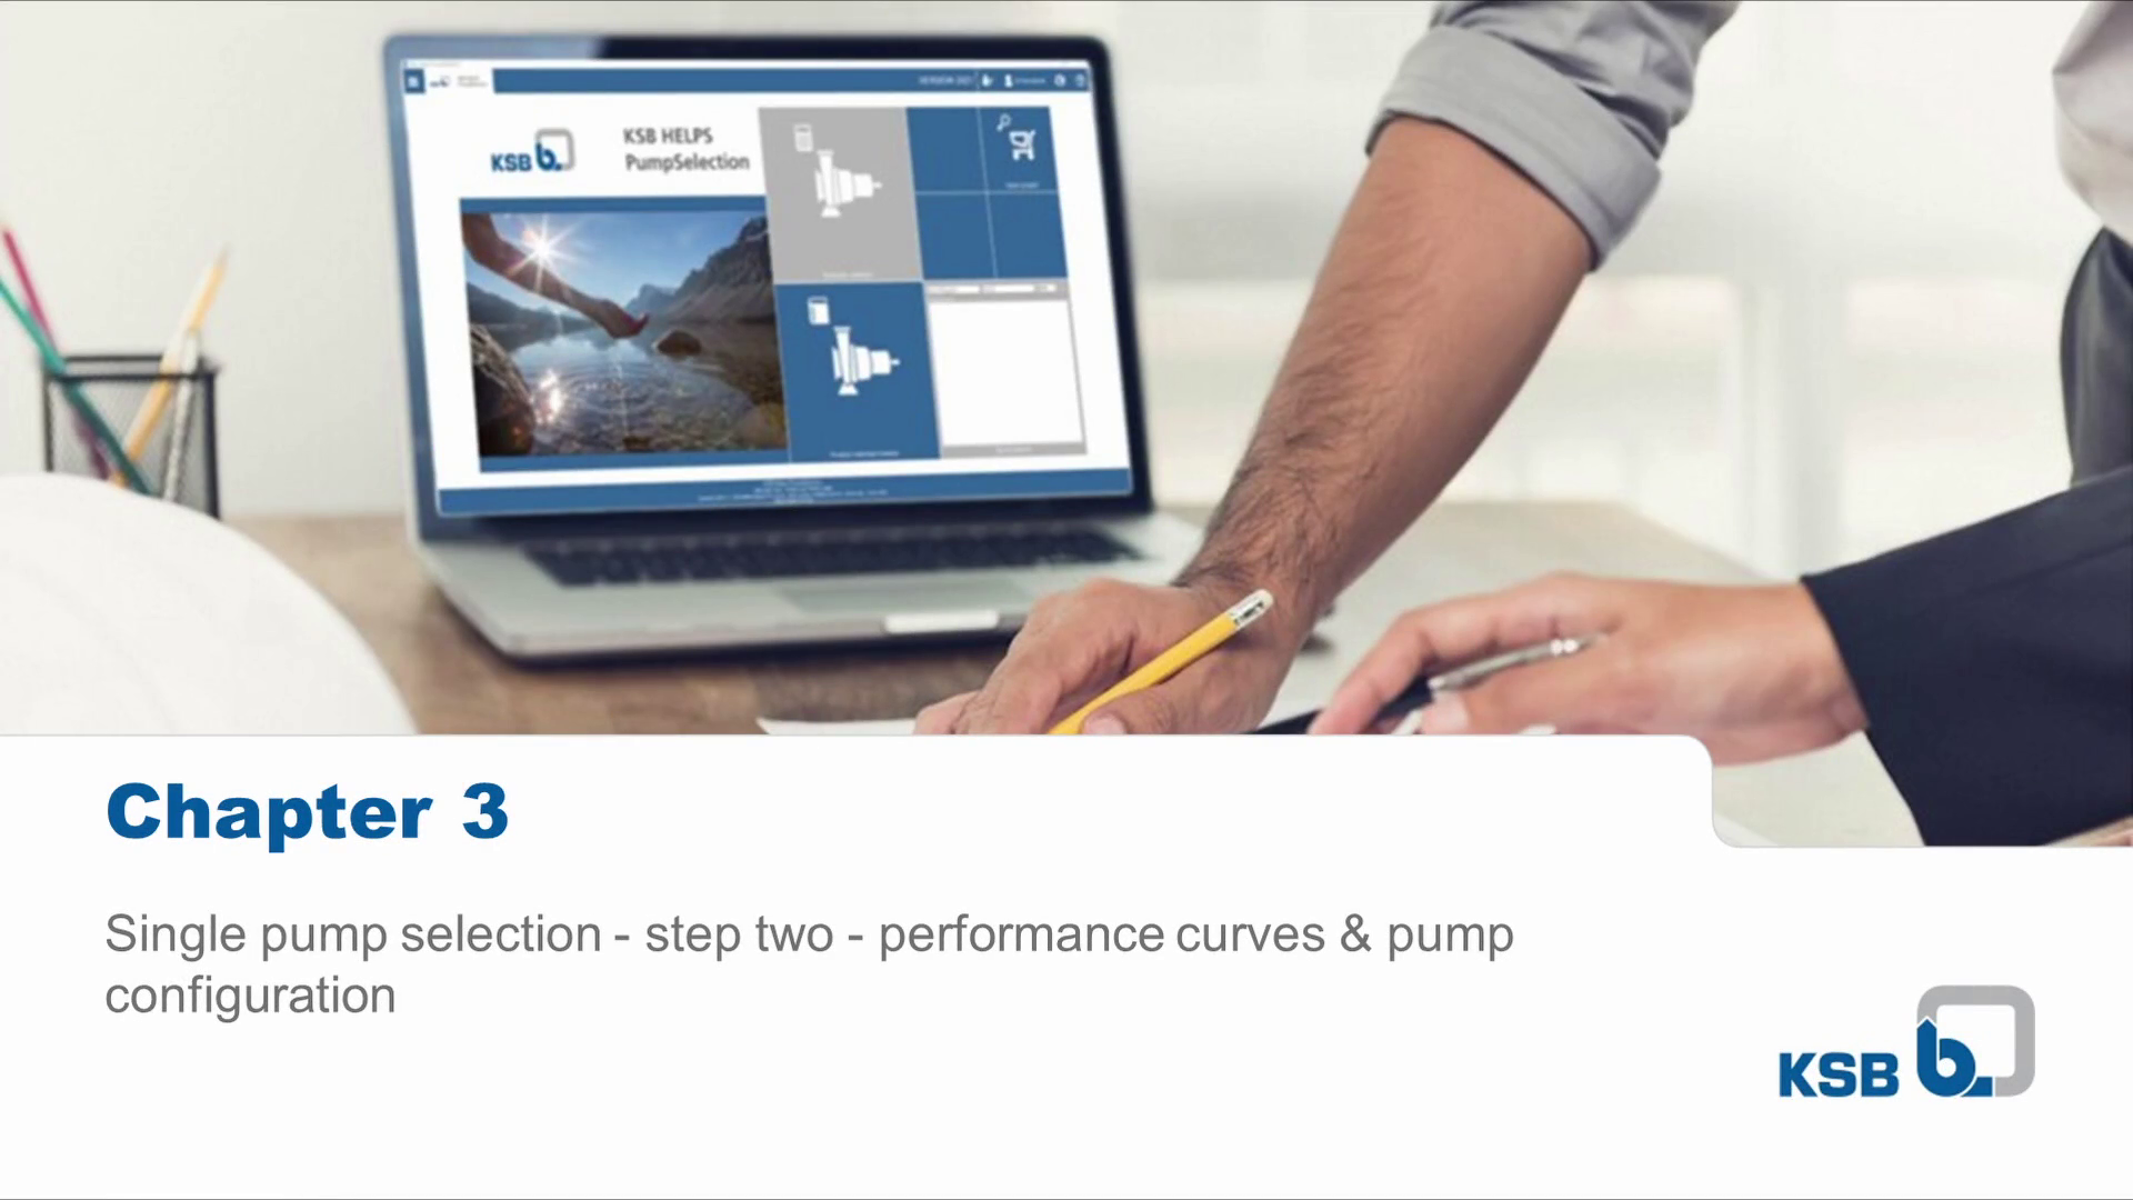 Tutorial KSB HELPS PumpSelection, Chapter 3: Single pump selection – step two – performance curves & pump configuration